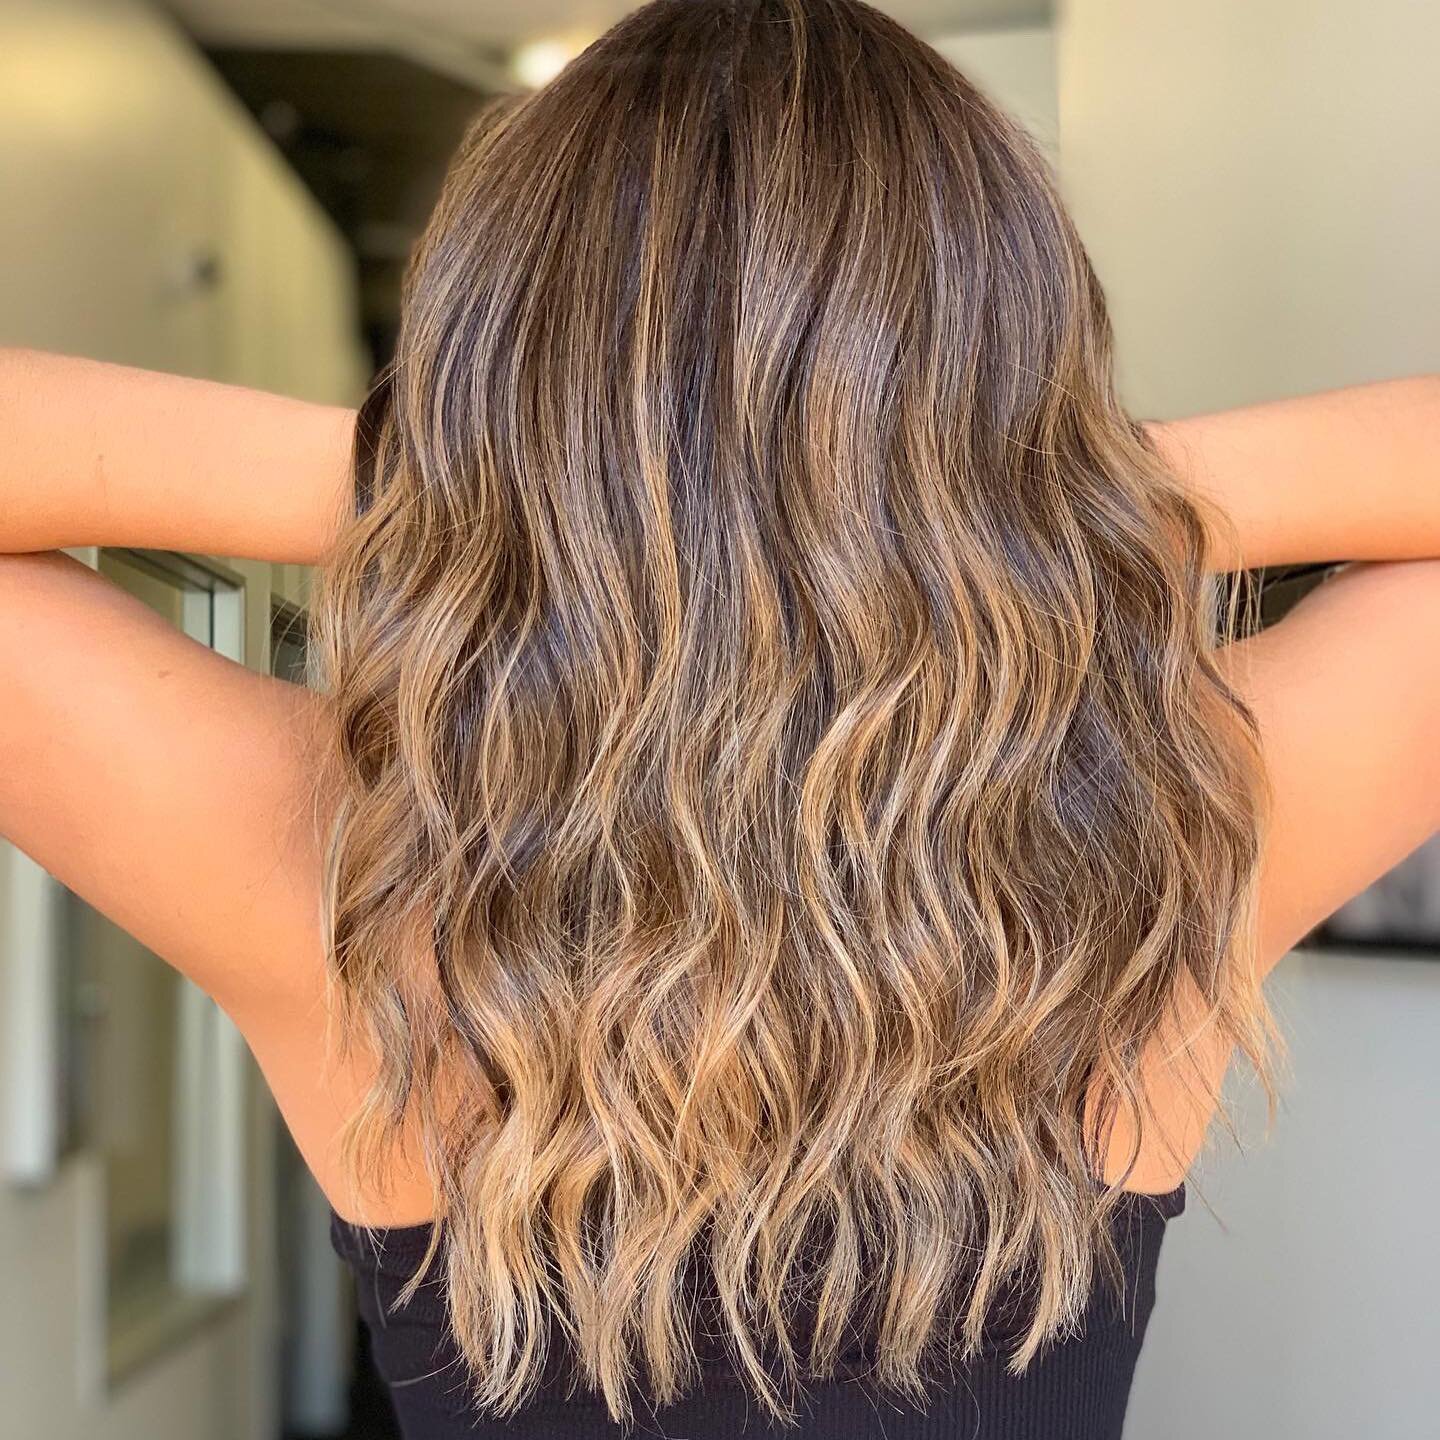 Do you feel like sometimes you are over highlighted? You feel like there isn&rsquo;t as much dimension or it&rsquo;s too blonde??

I did @samantha.urbina hair the previous time and I loved how it grew out but I felt like she needed more highs and low